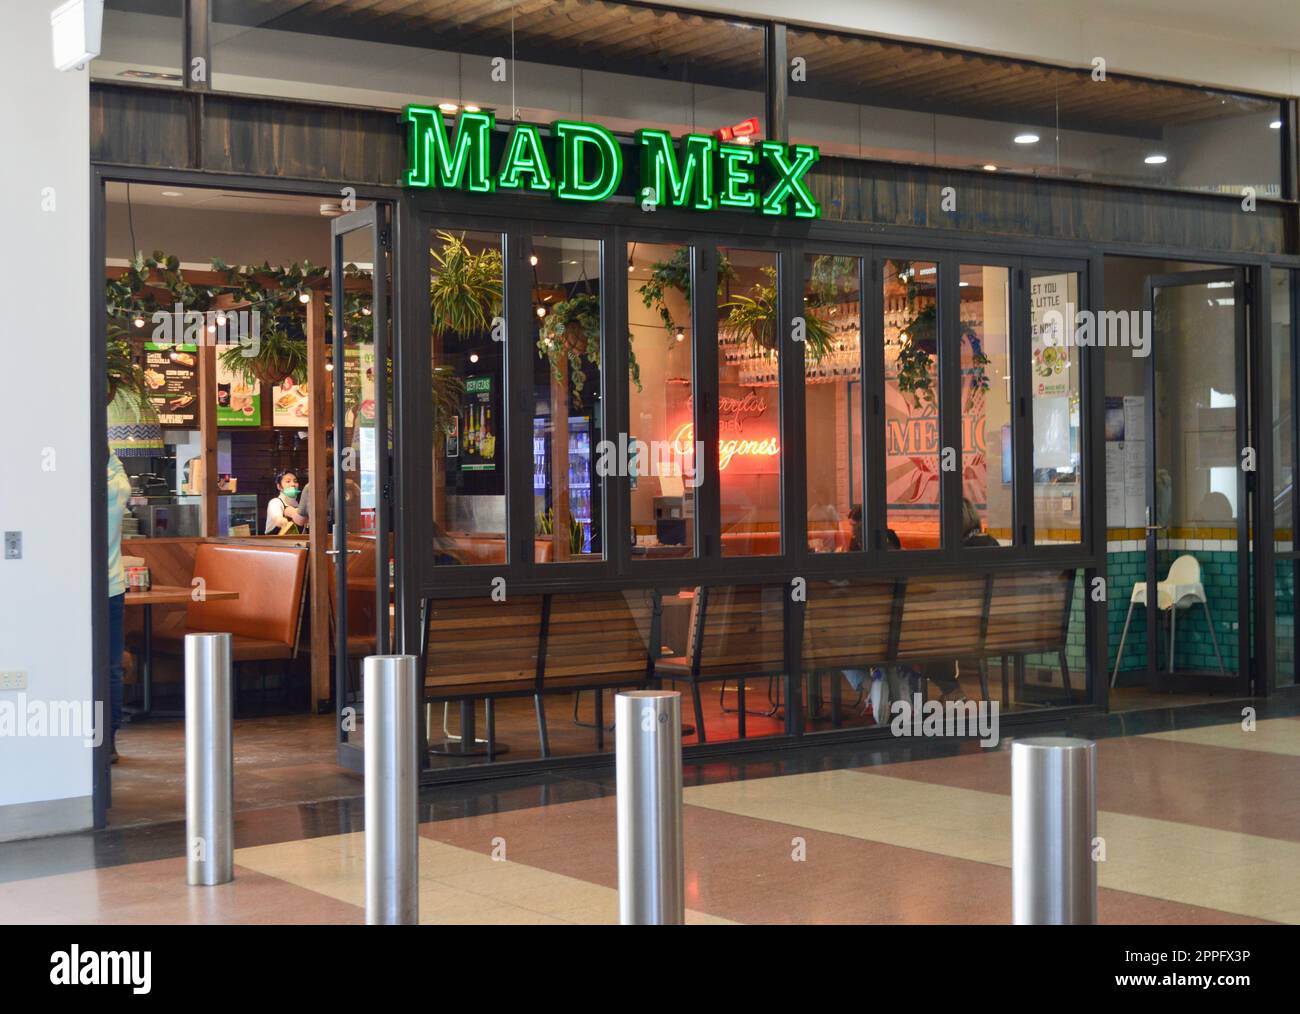 Mad Mex restaurant at Penrith in Sydney's western suburbs Stock Photo